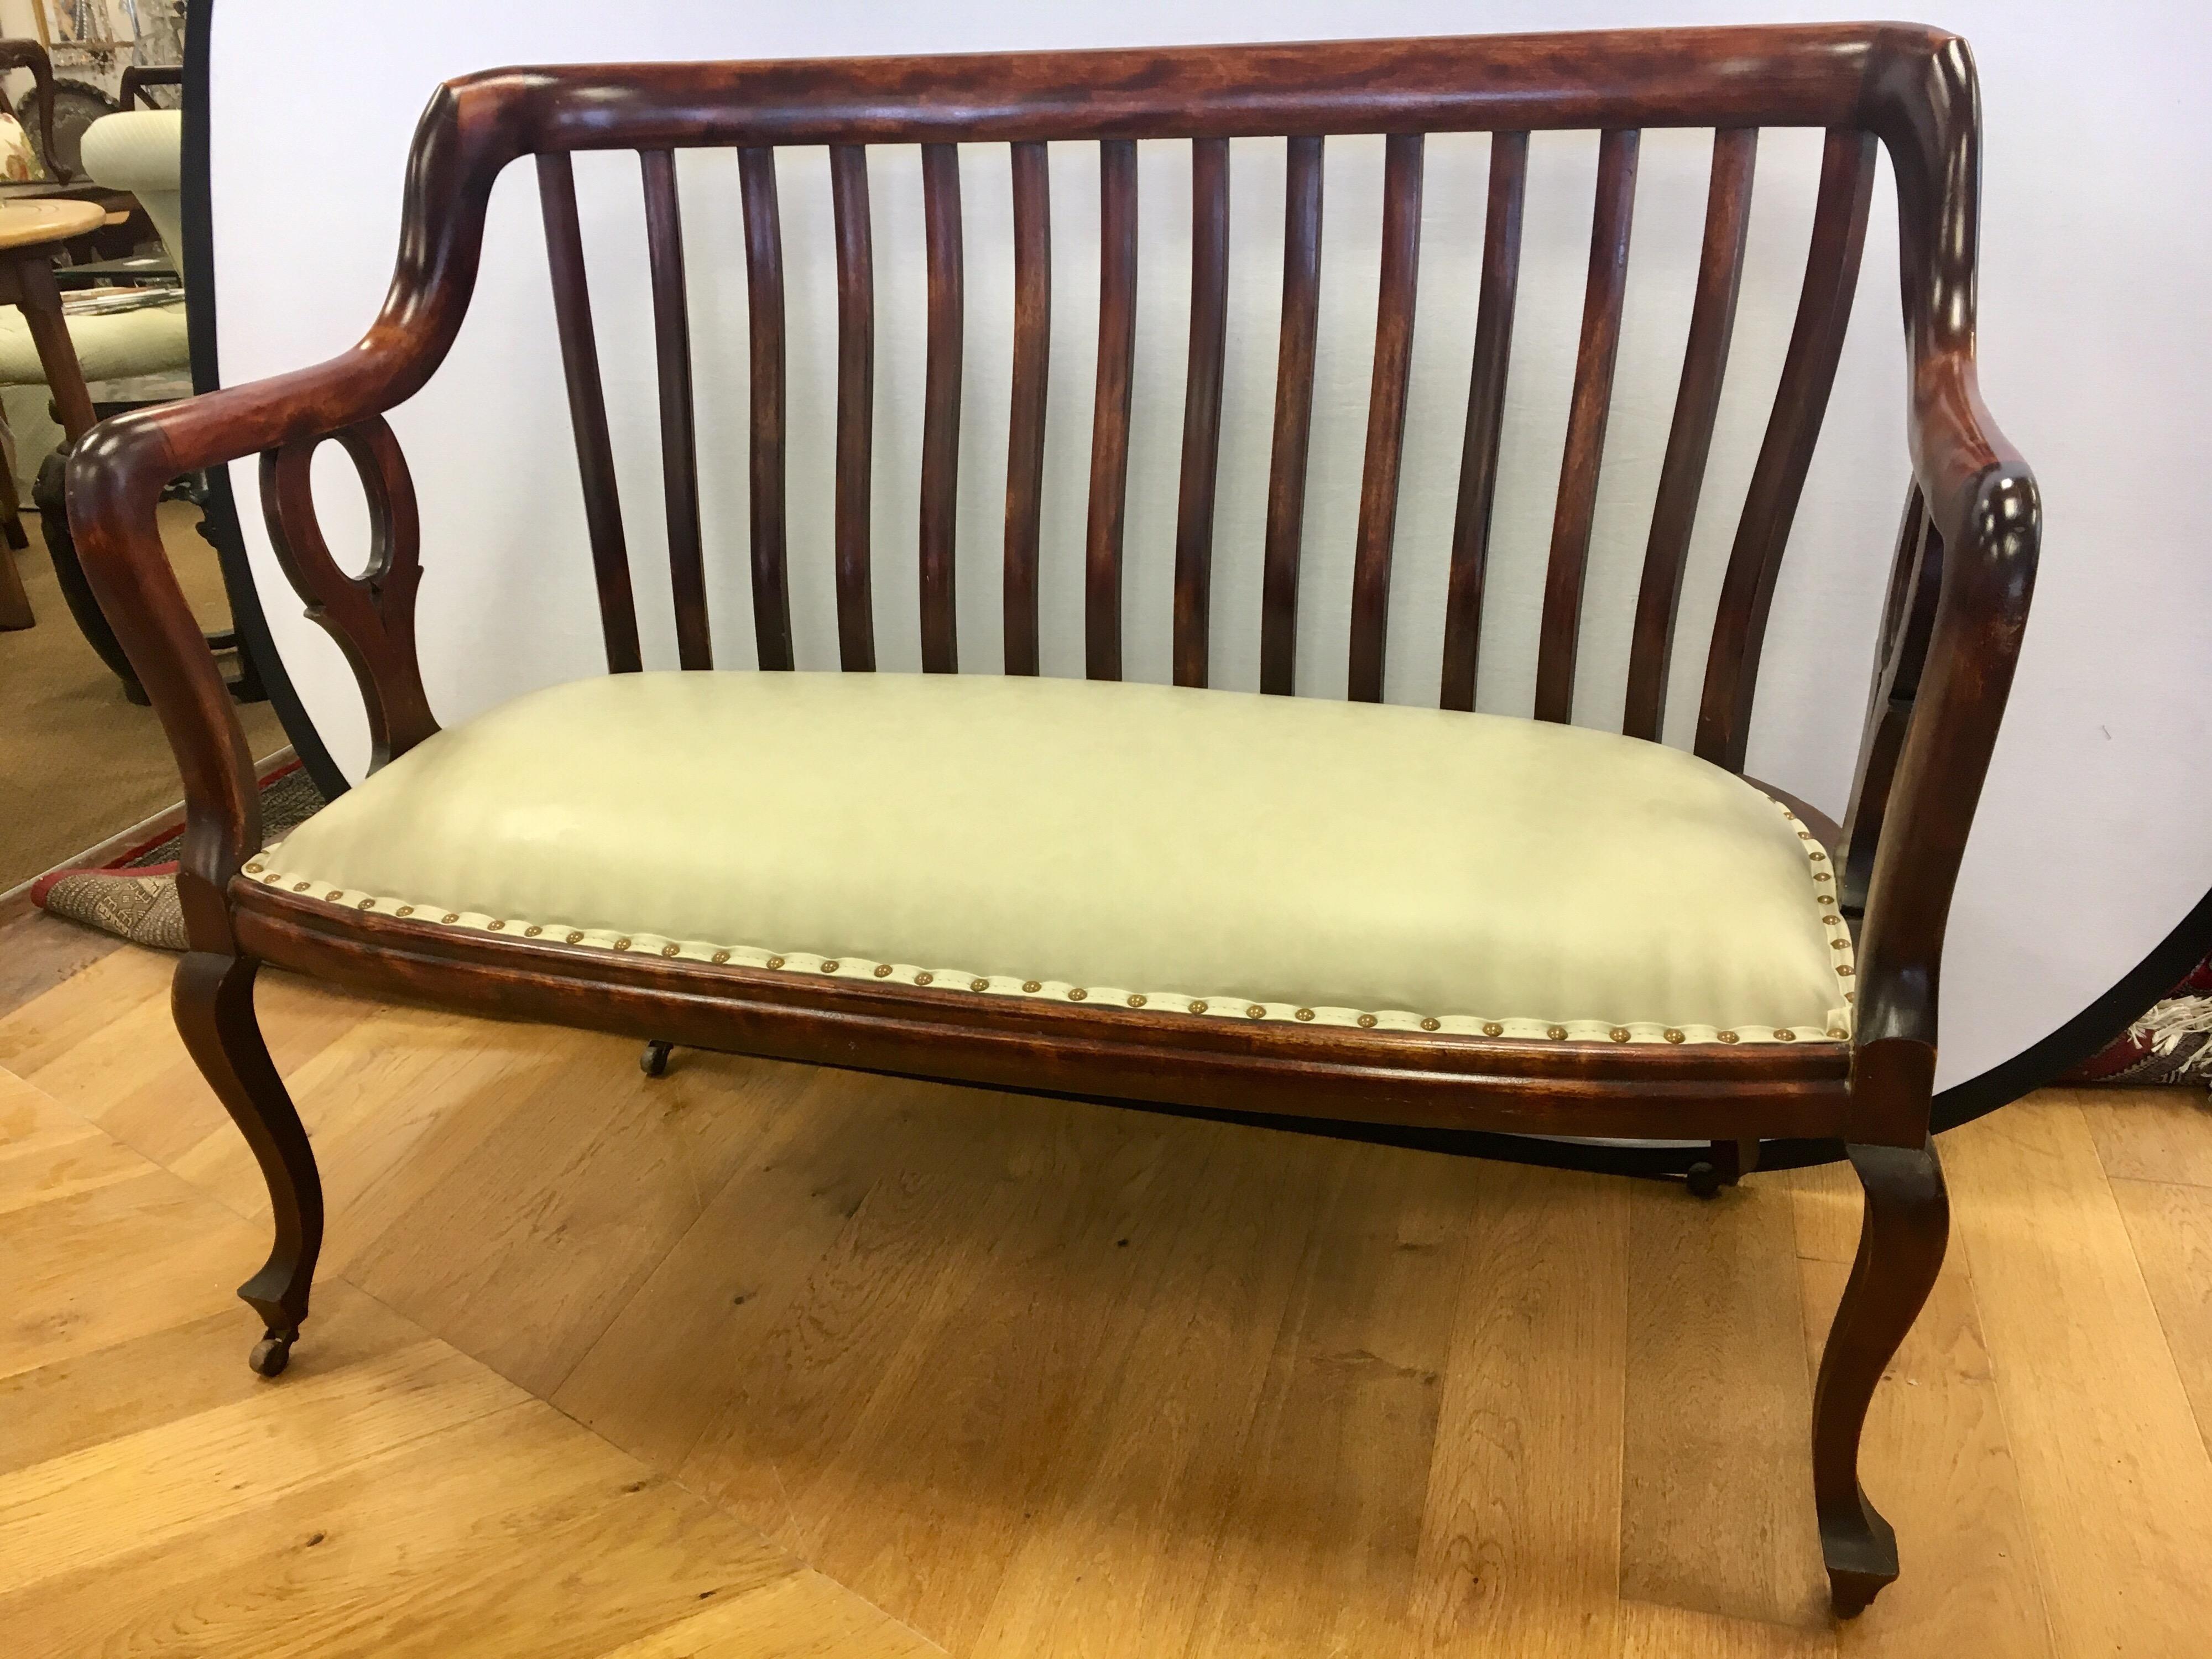 Late 19th Century English Mahogany Settee Bench Fully Restored with New Upholstery Made in England